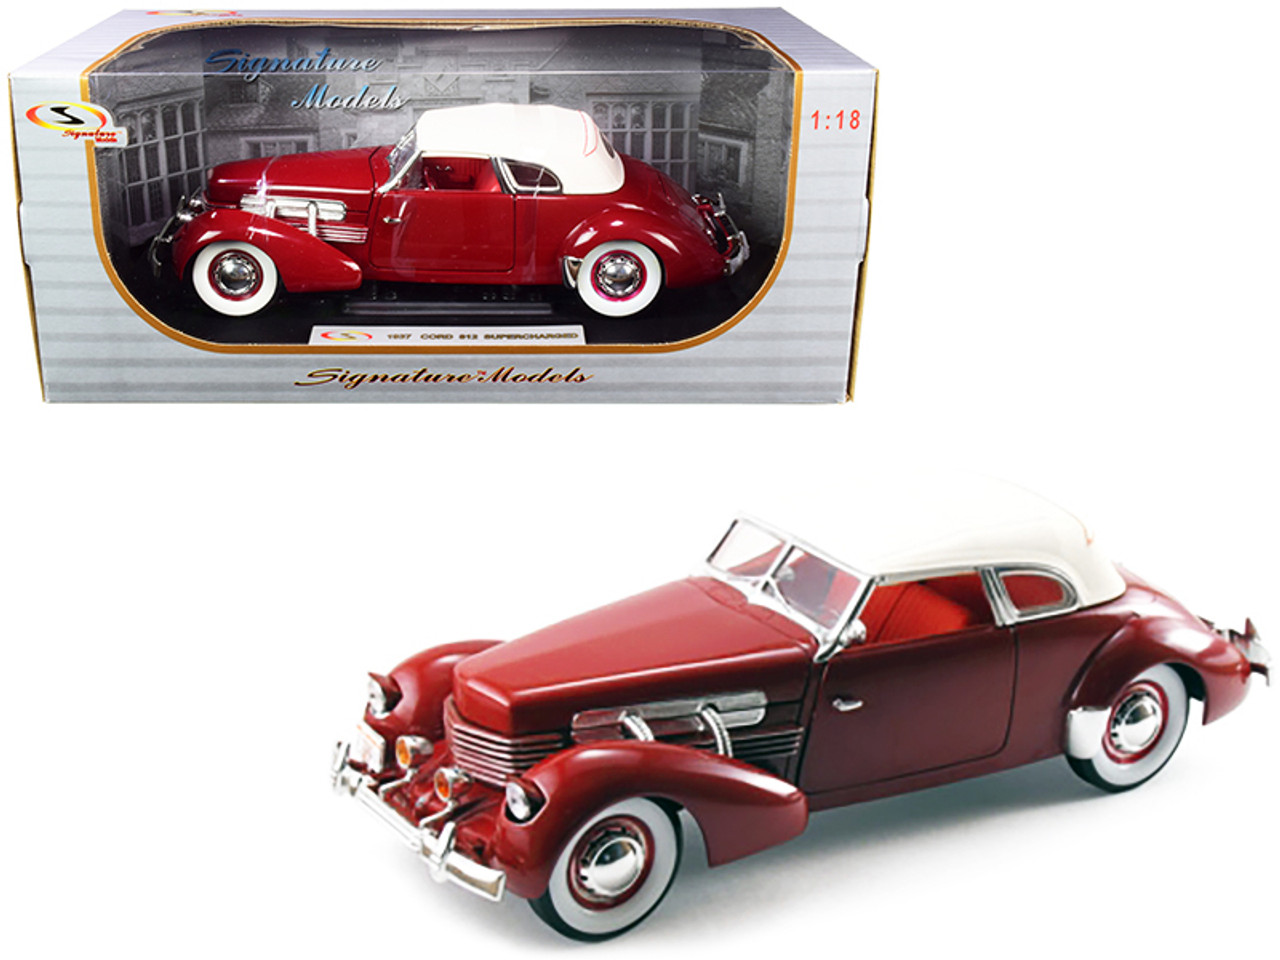 1937 Cord 812 Supercharged Coupe Burgundy with White Top 1/18 Diecast Model Car by Signature Models